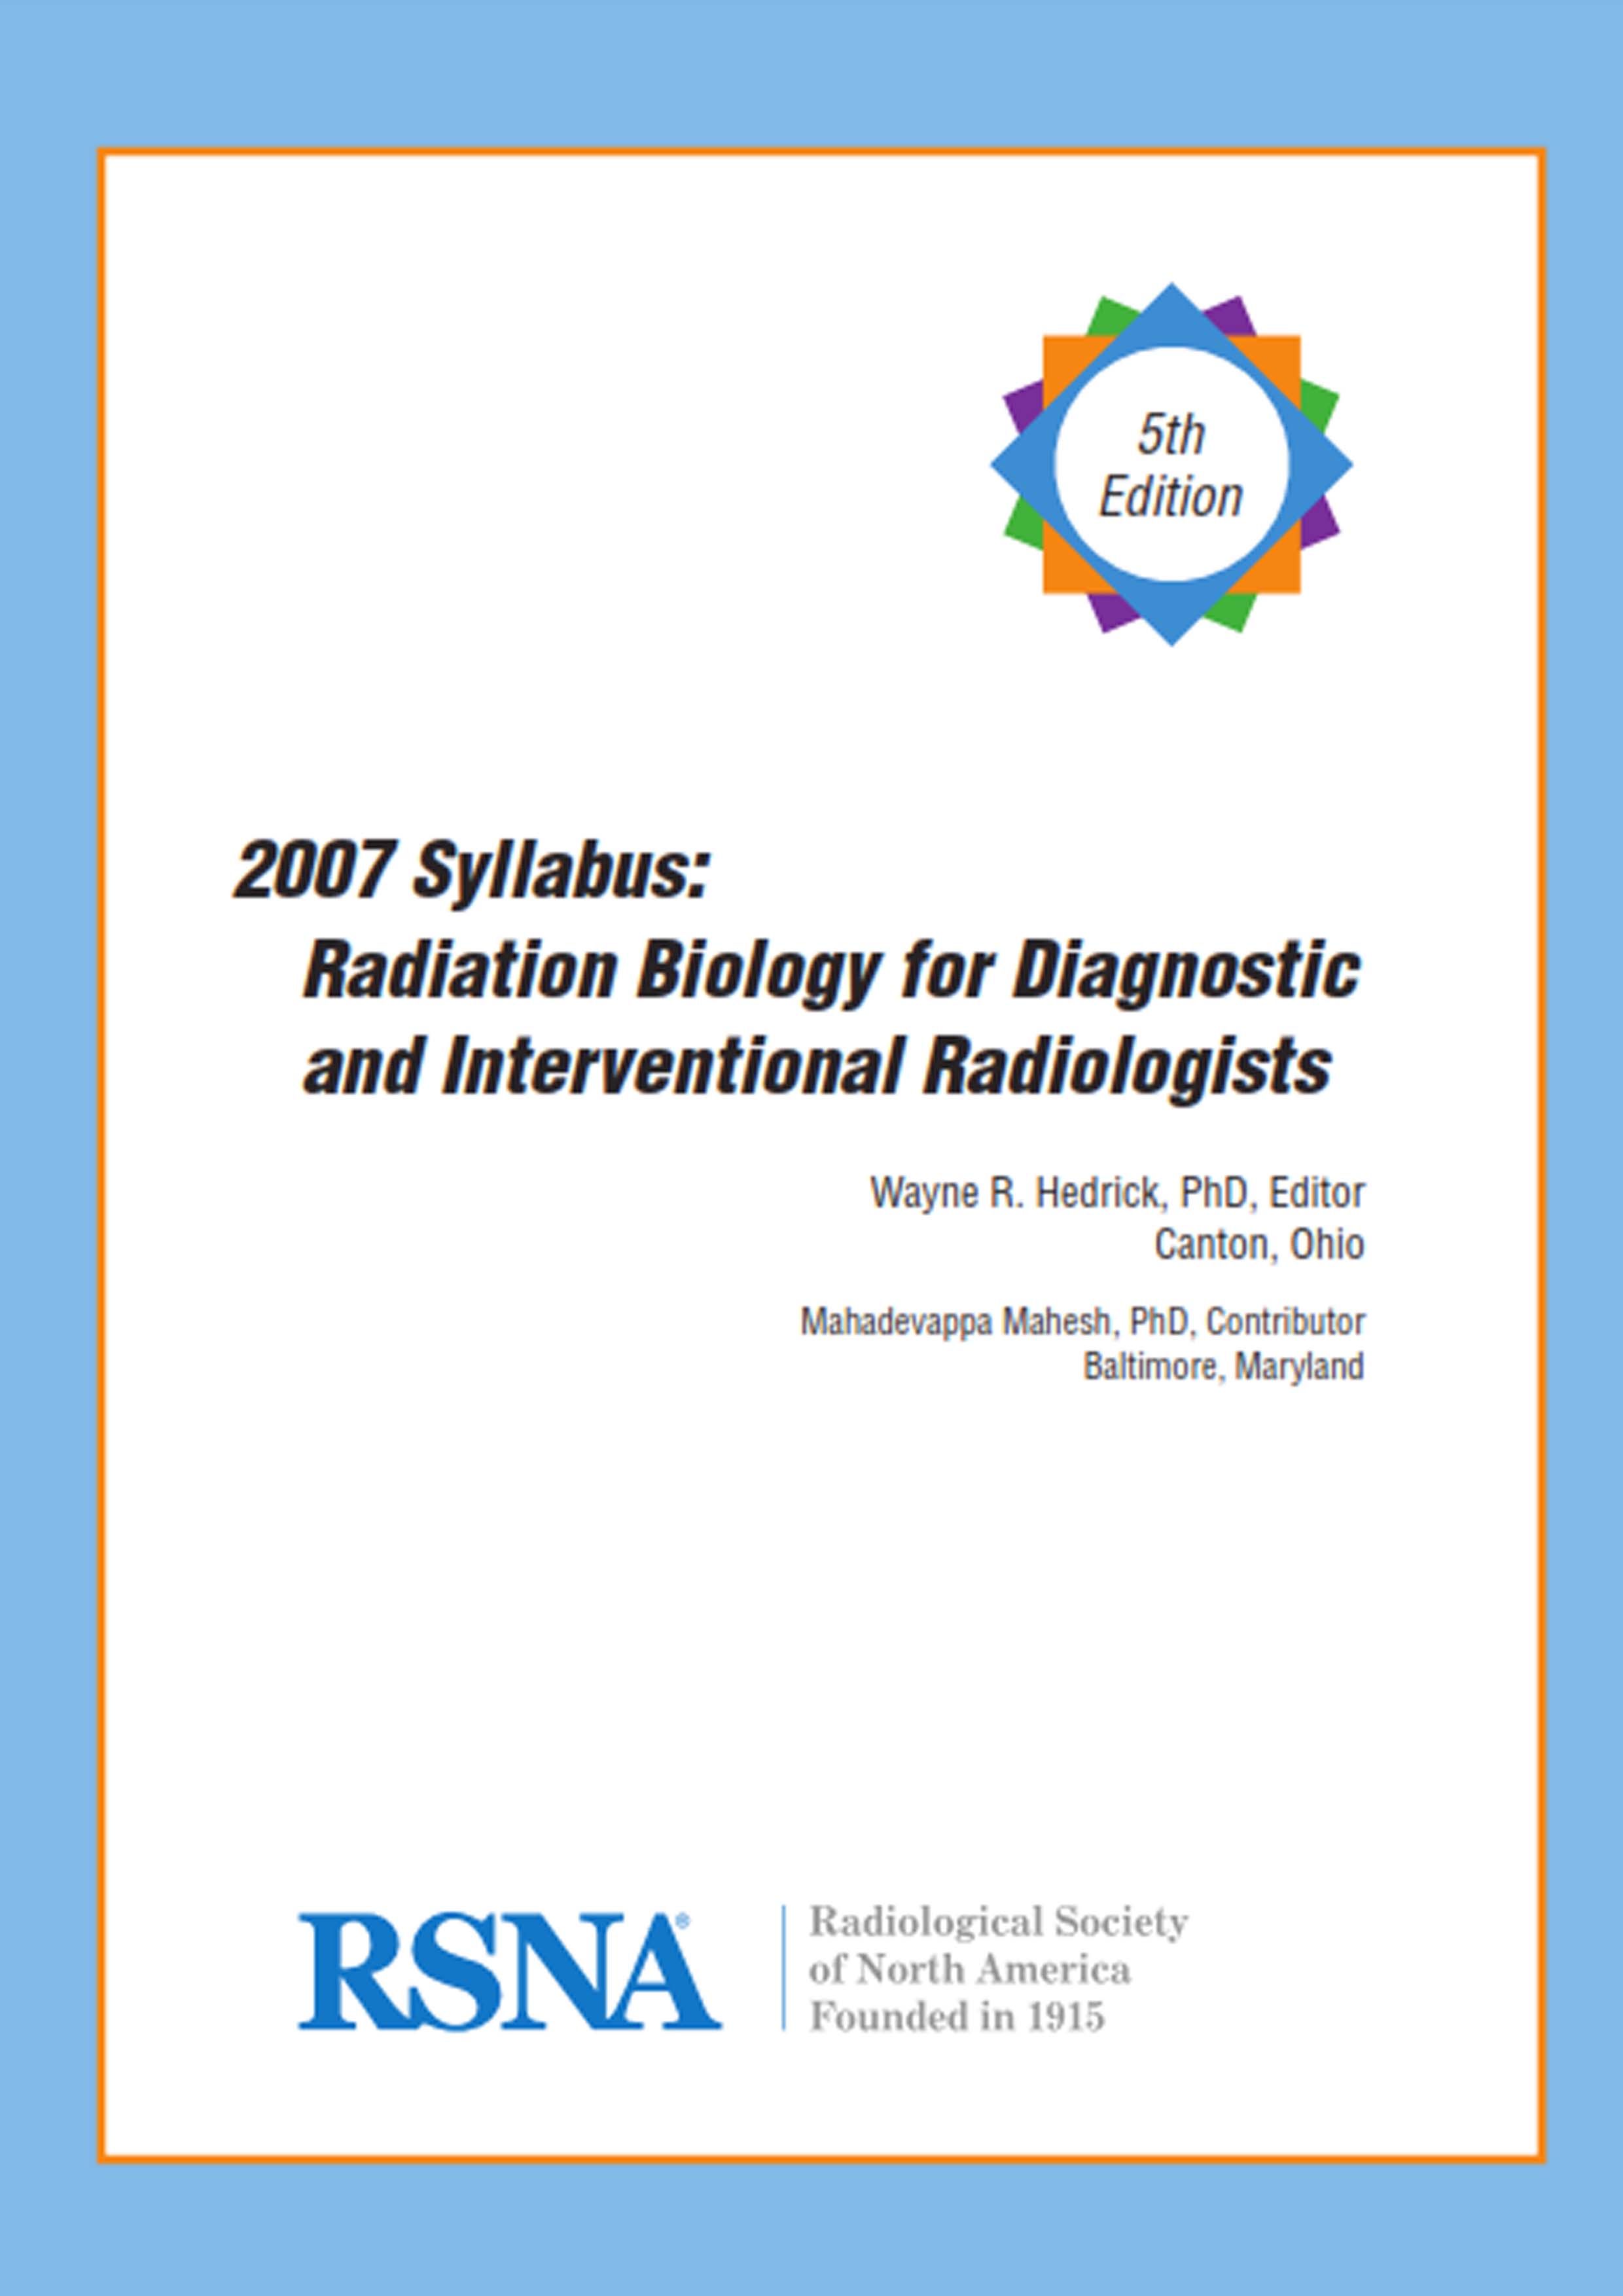 RSNA 2007 Syllabus - Radiation Biology for Diagnostic and Interventional Radiologists